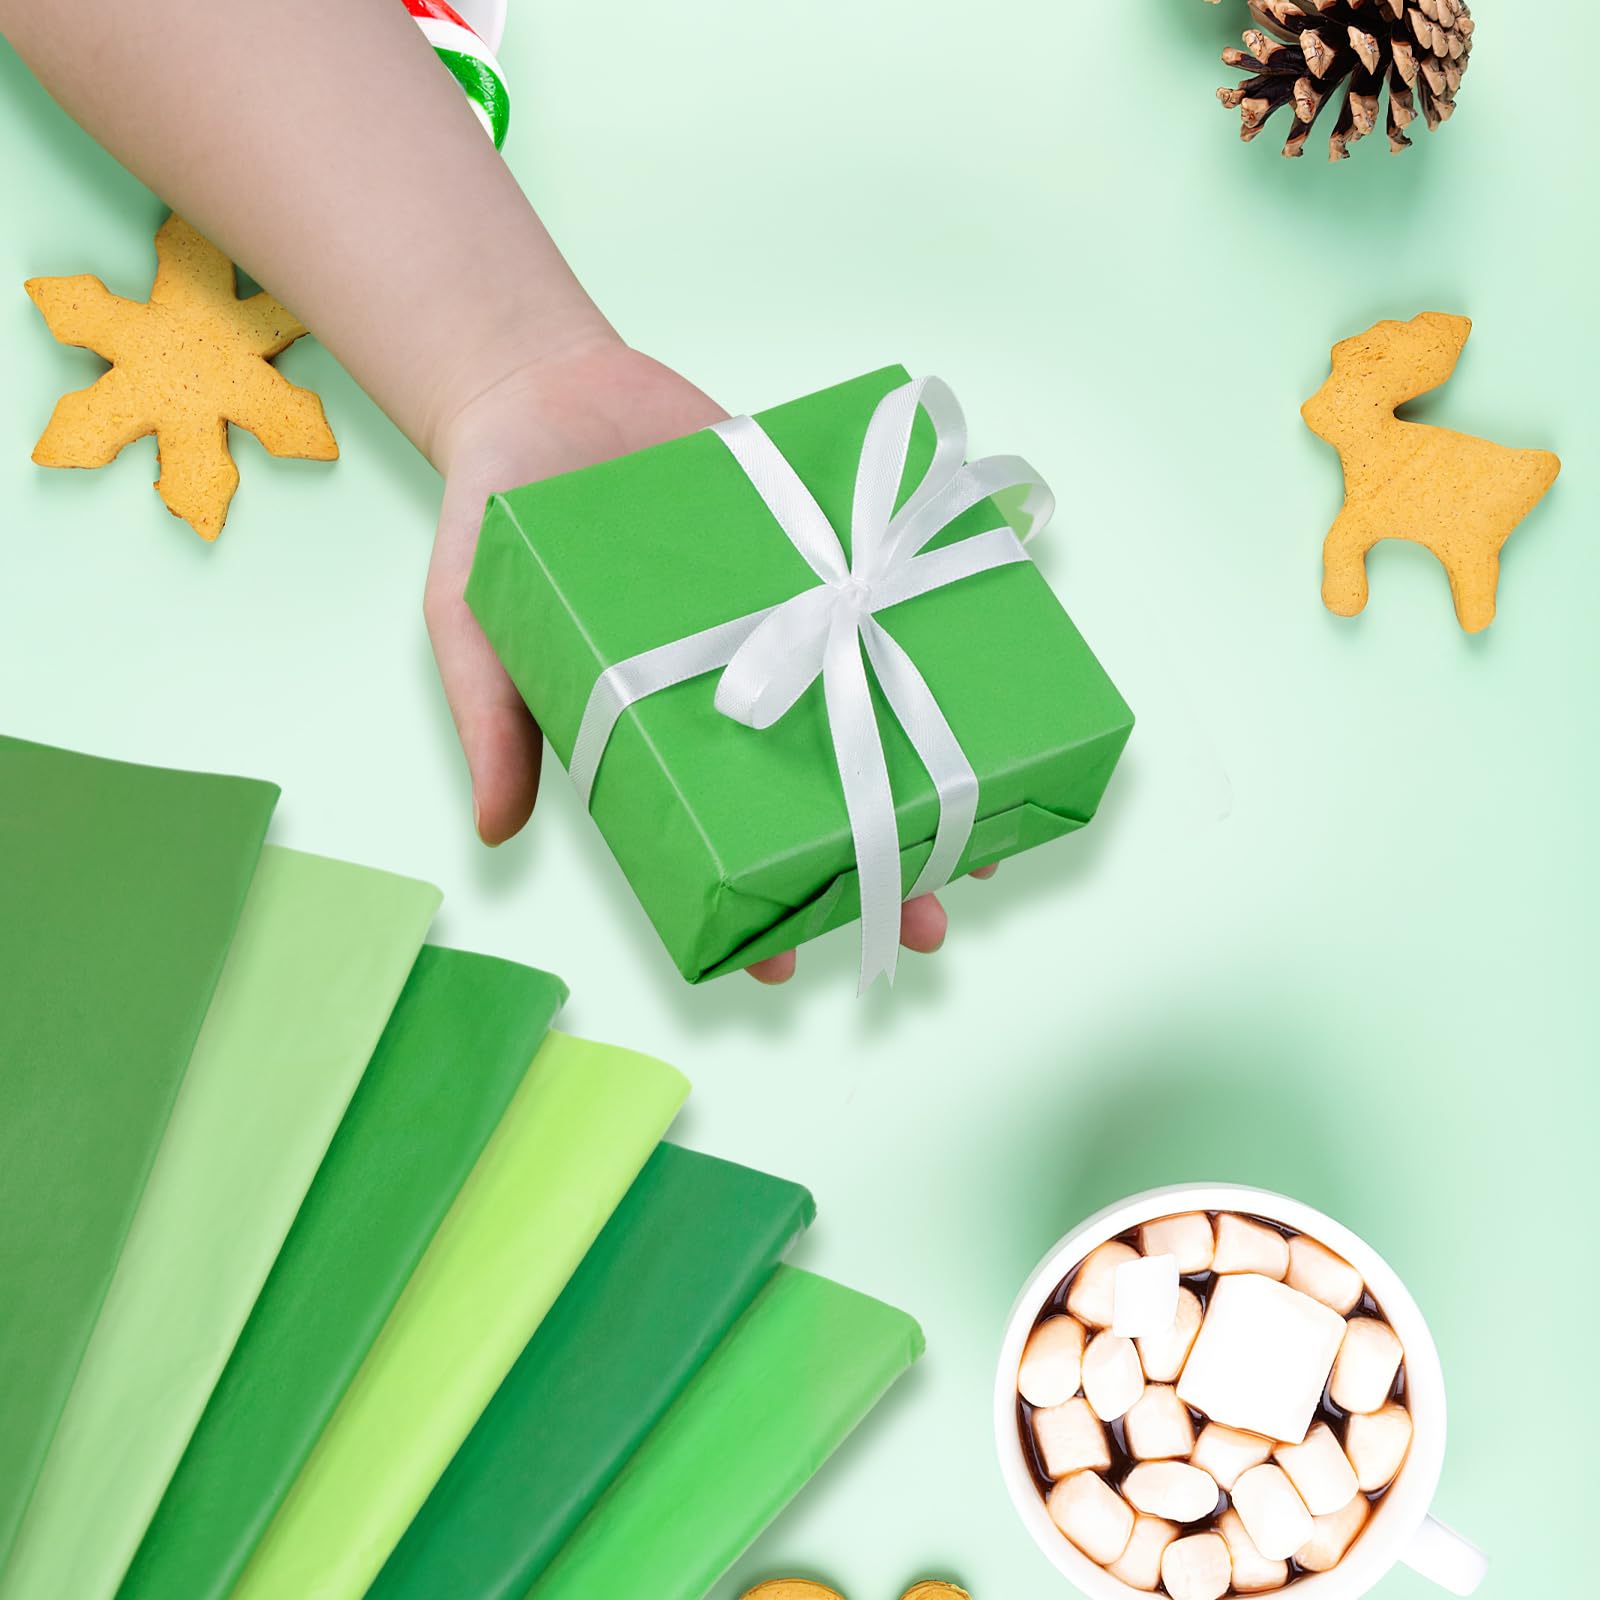  Shindel 180Sheets Green Wrapping Tissue Paper for